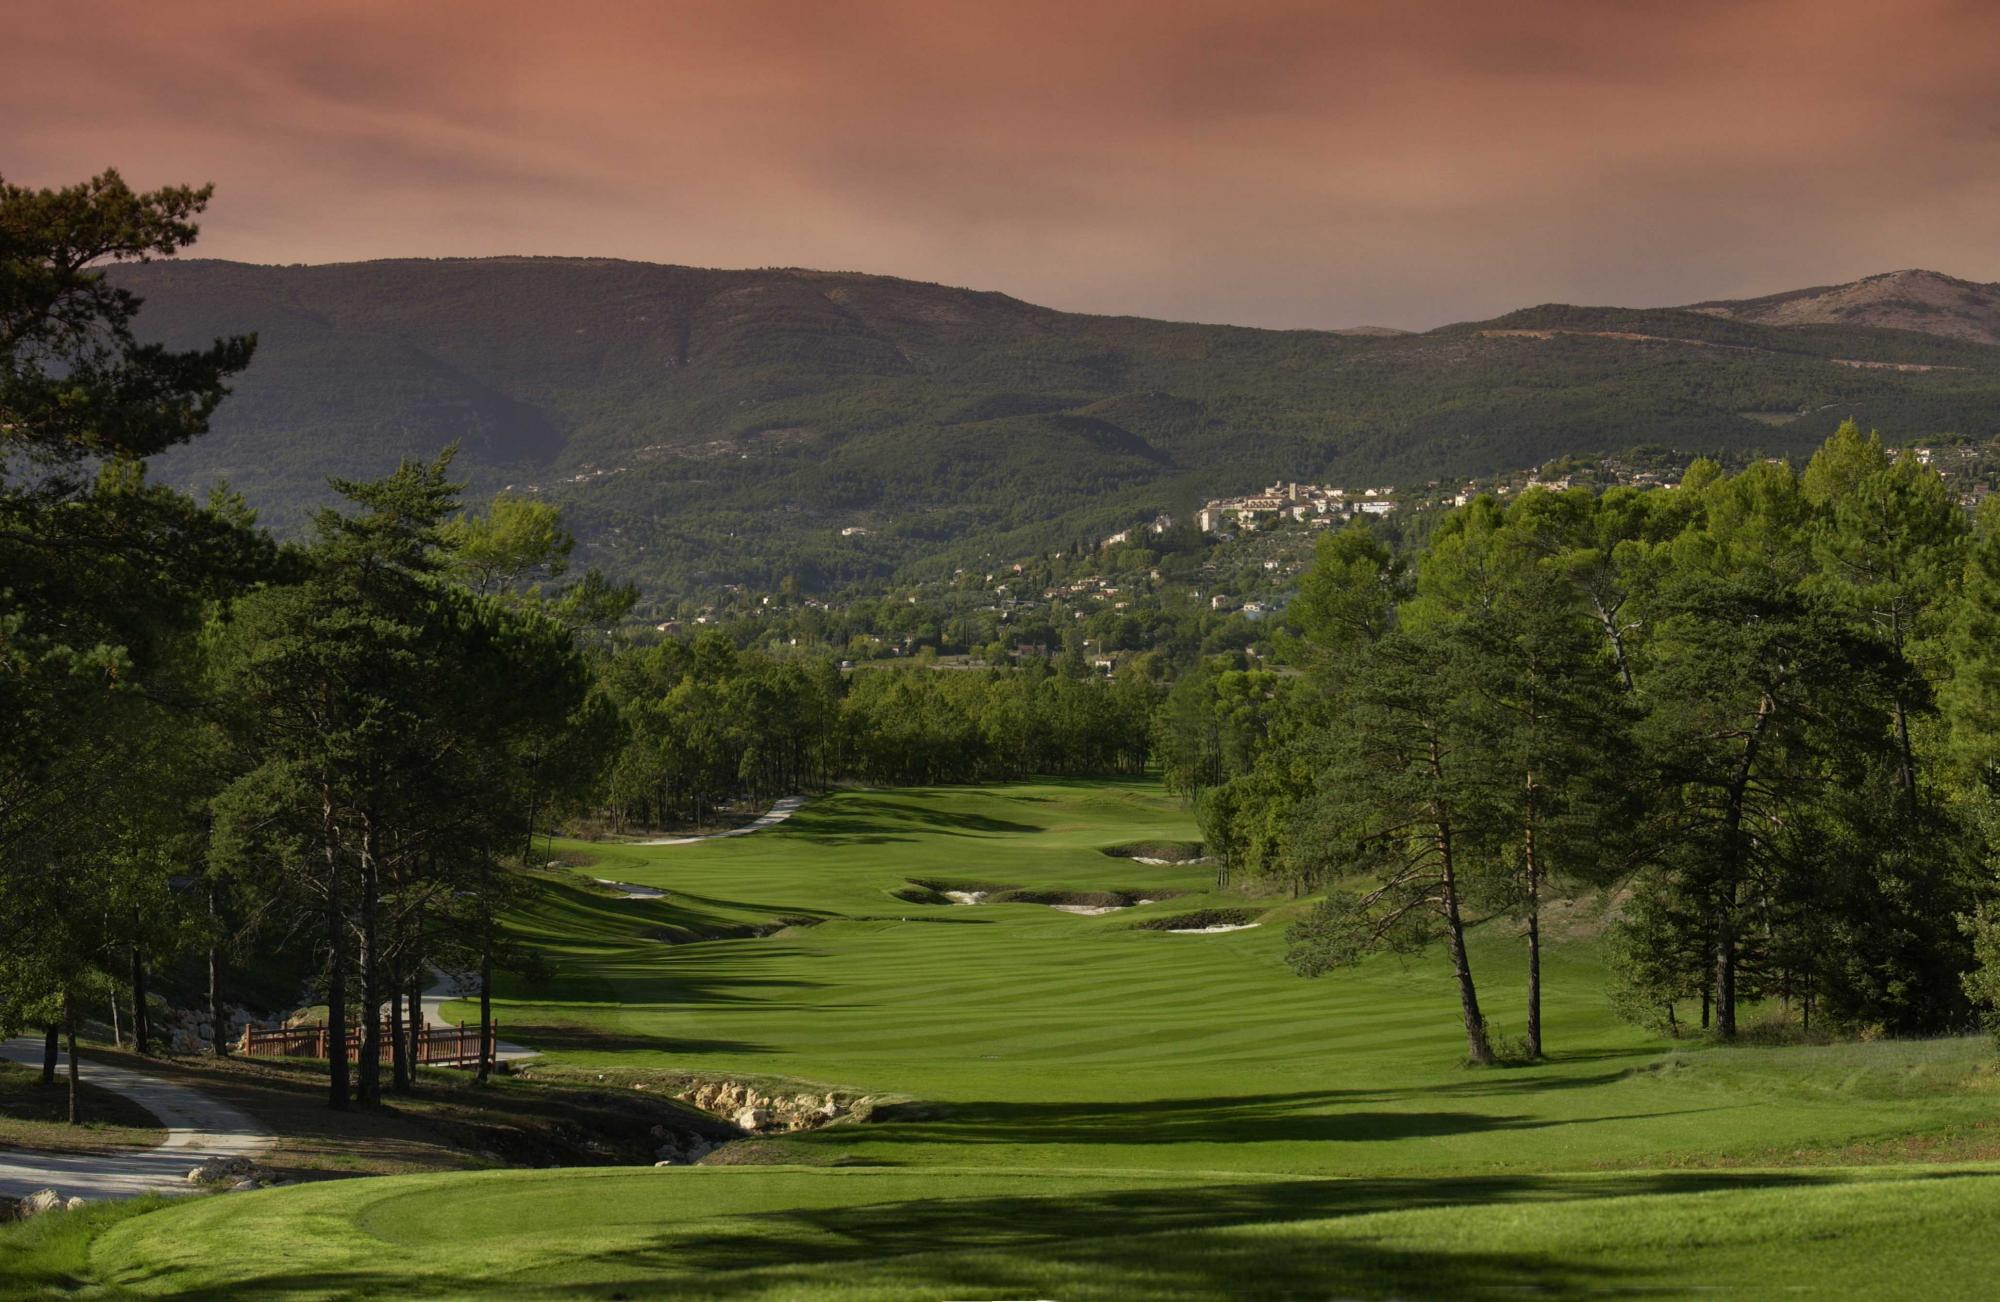 Terre Blanche offers some of the most desirable golf course near South of France